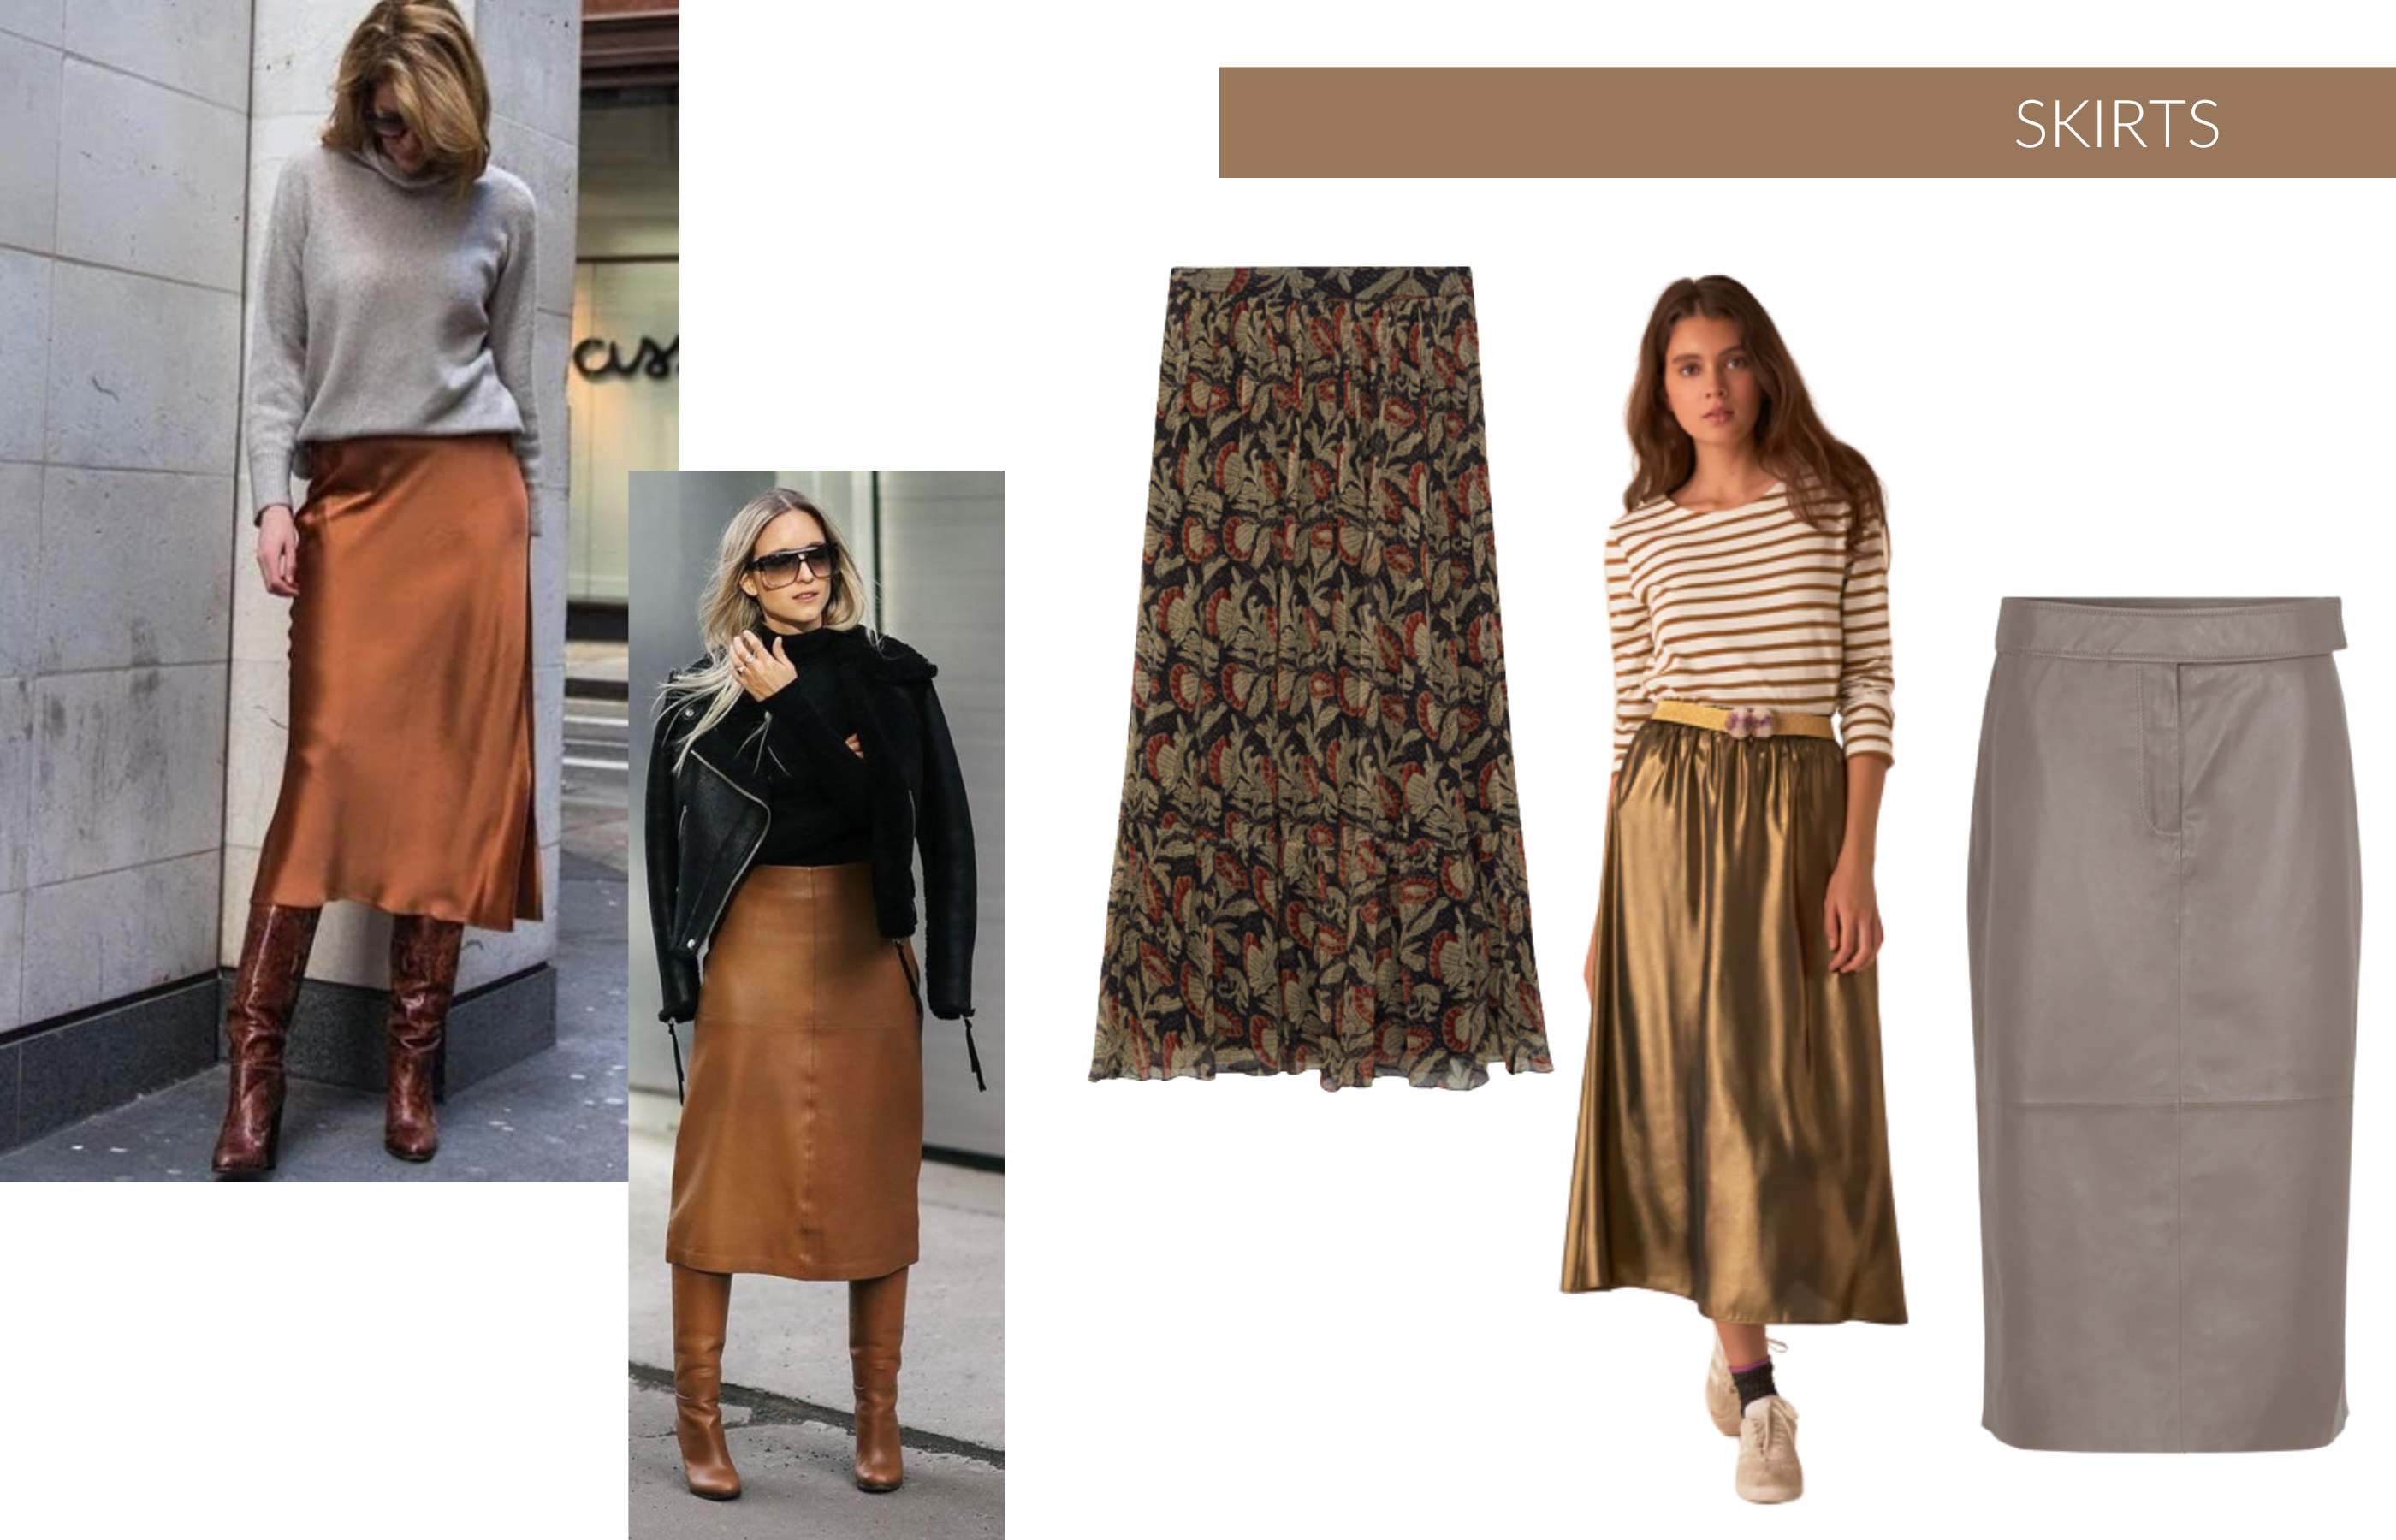 Brown Skirts trending on the streets and online